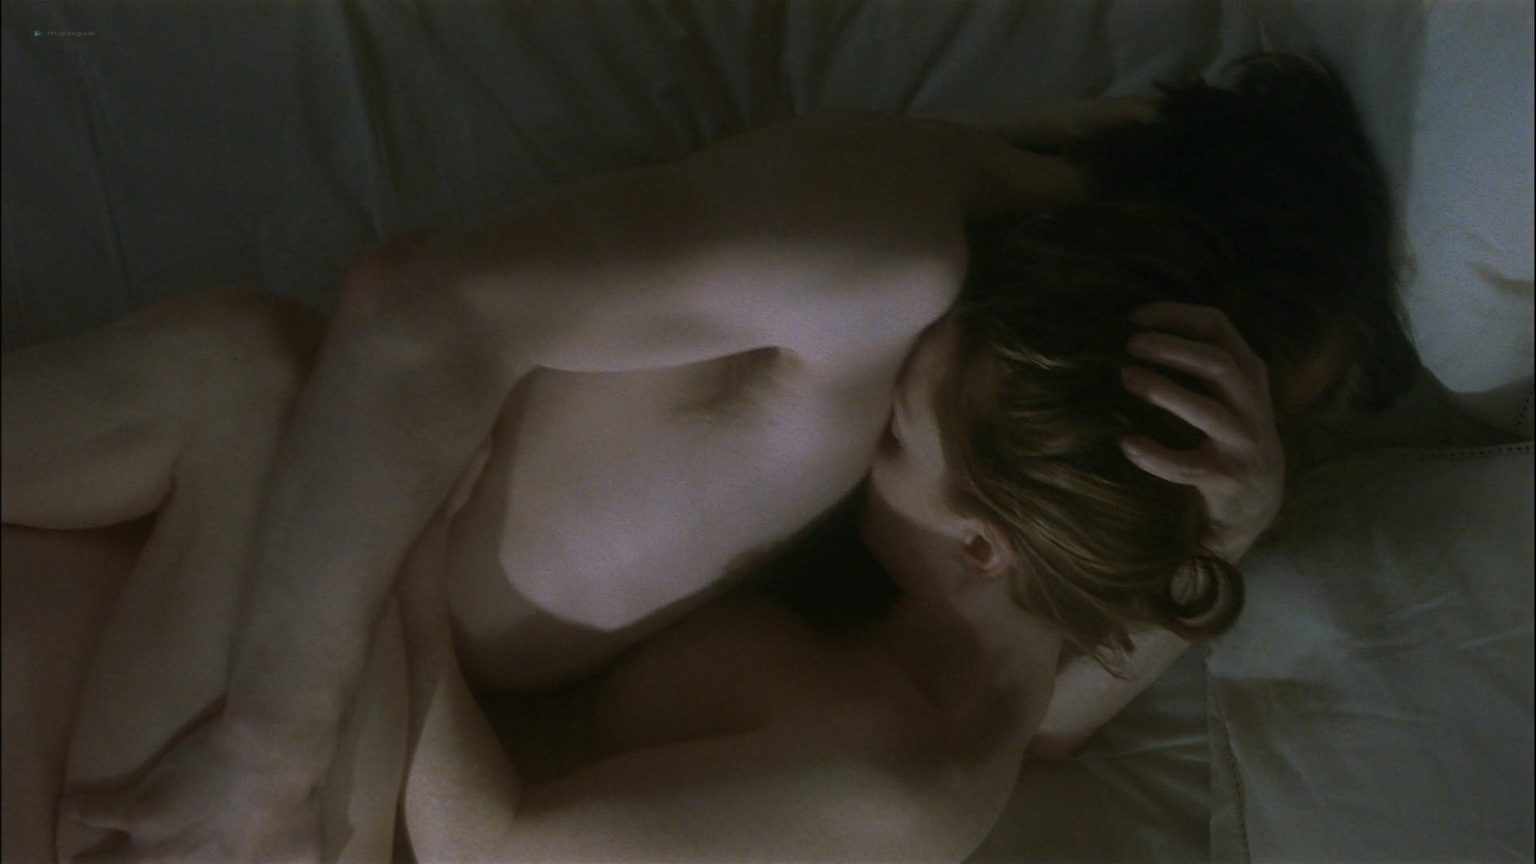 https://www.zorg.video/wp-content/uploads/2017/06/Julianne-Moore-nude-topless-and-sex-The-End-of-the-Affair-1999-HD-1080p-WEB-010-1536x864.jpg